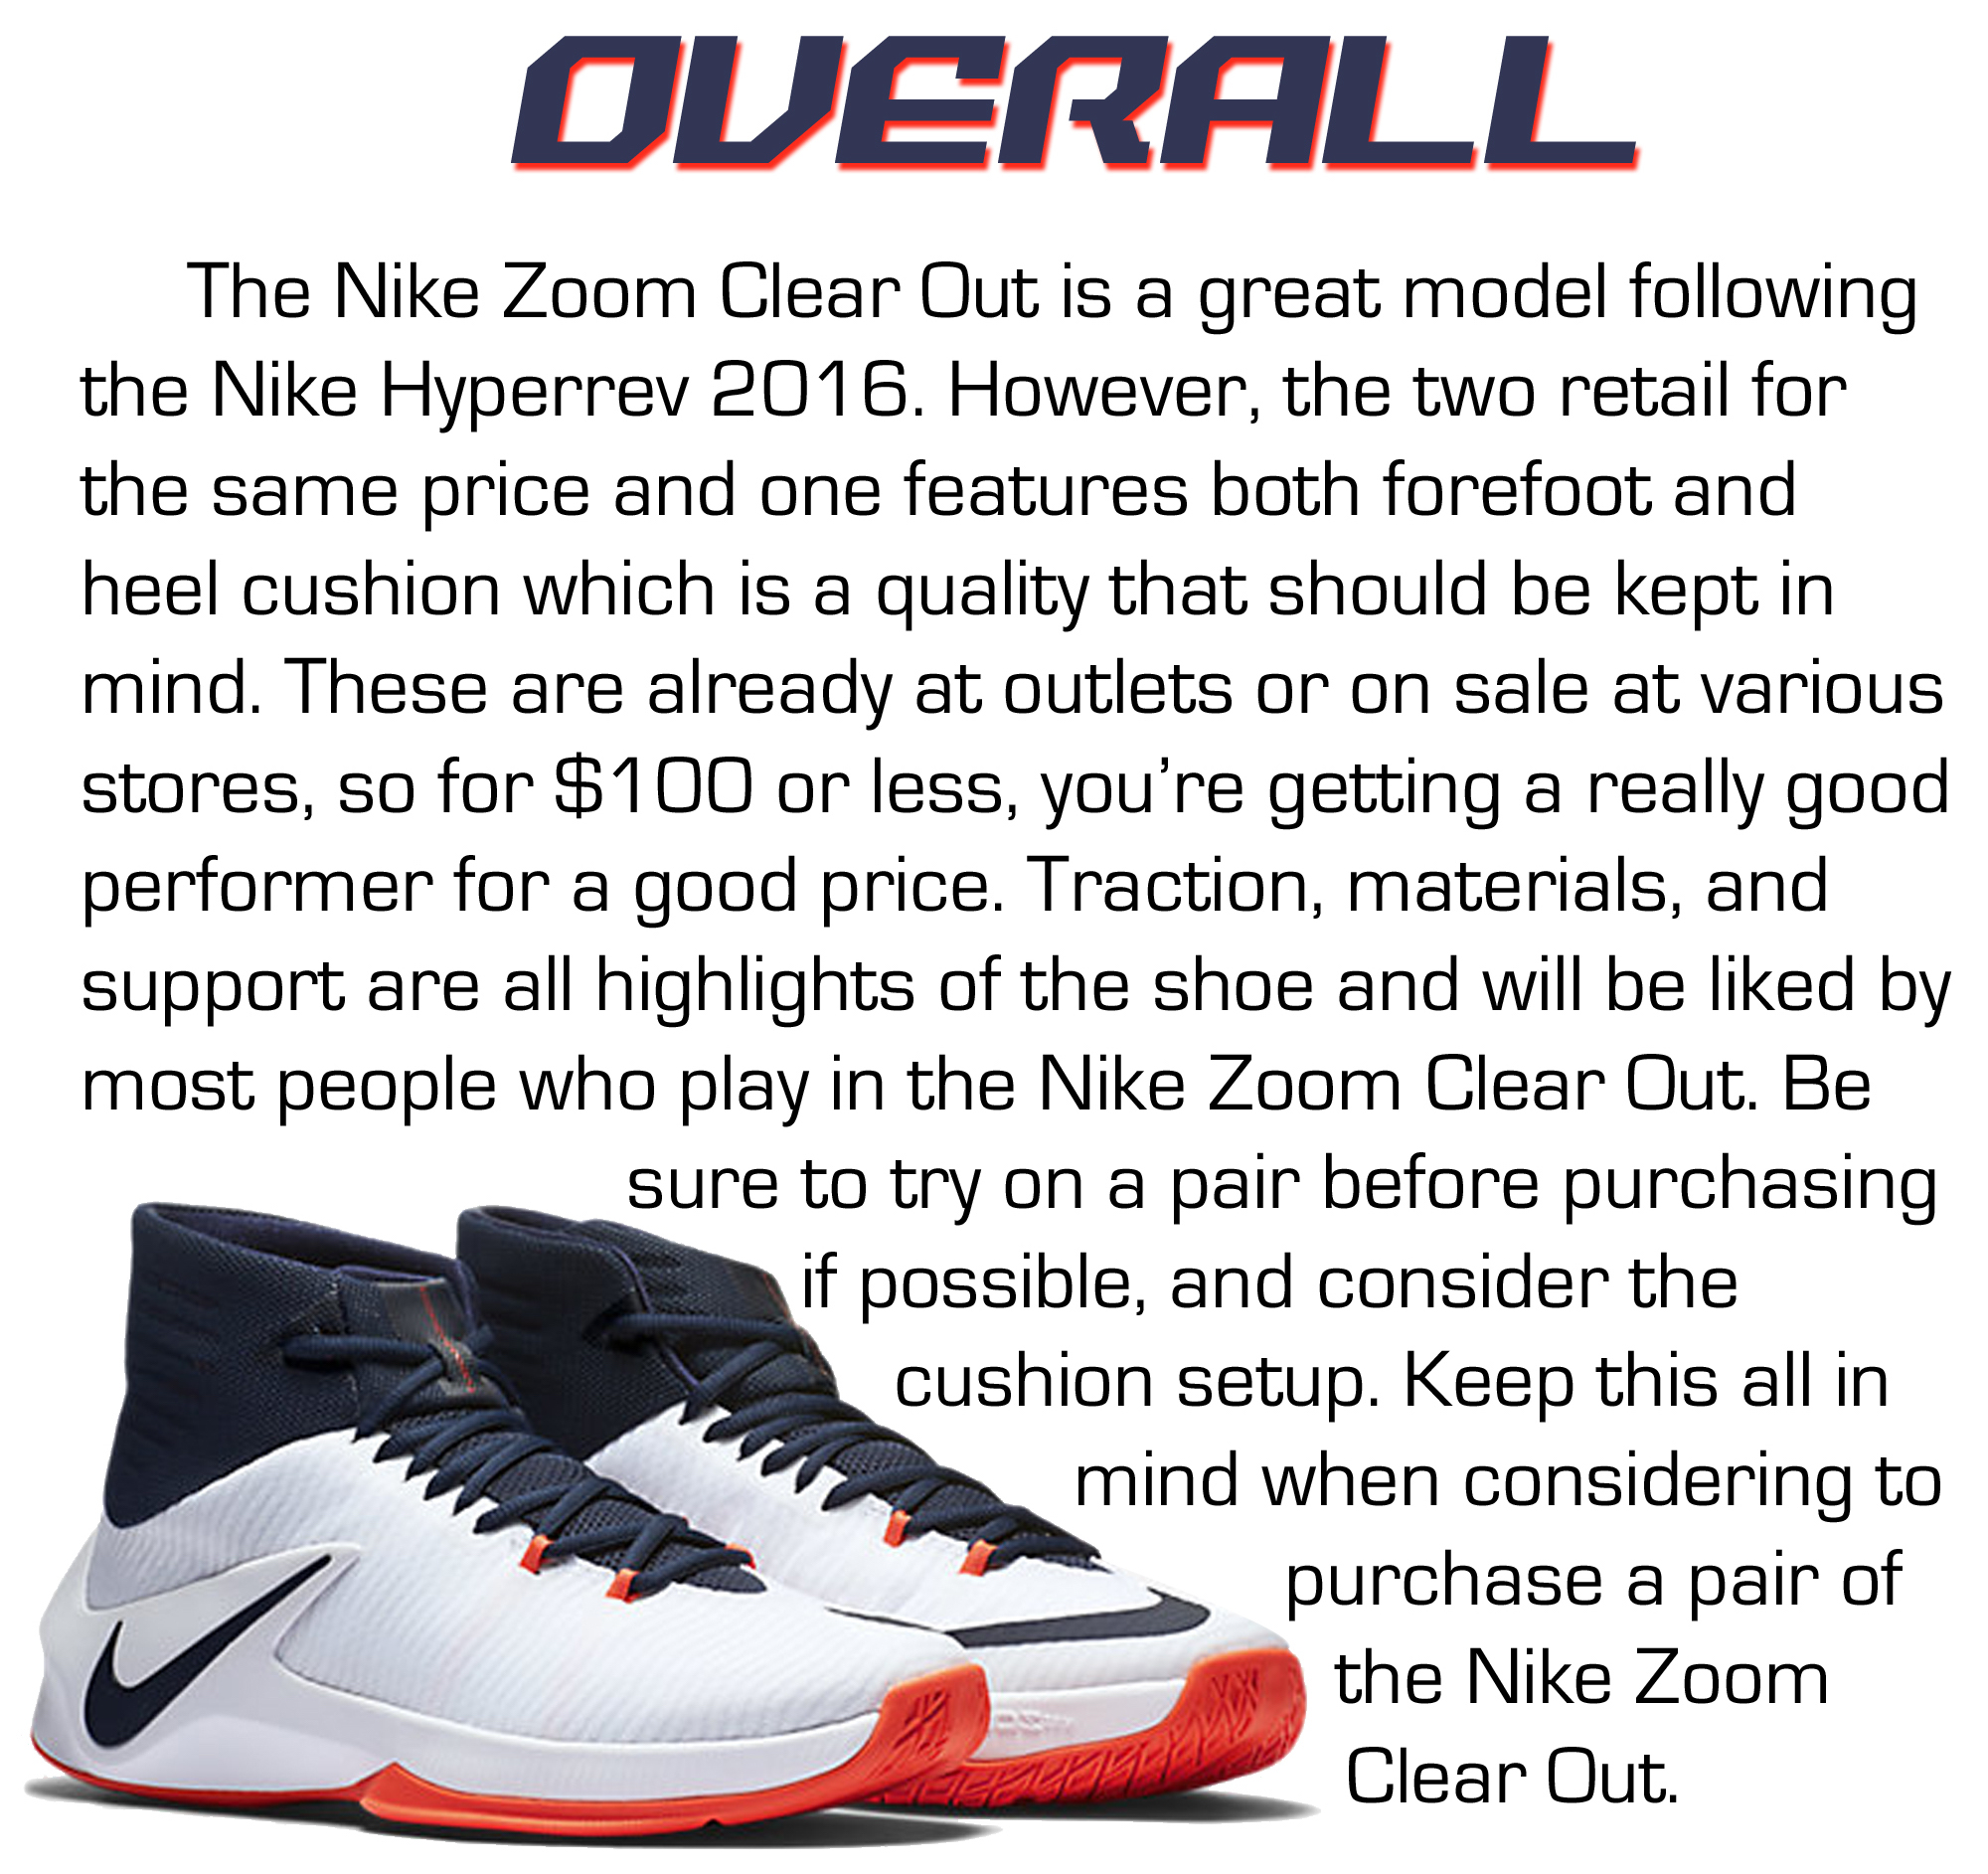 nike zoom clear out performance review 6